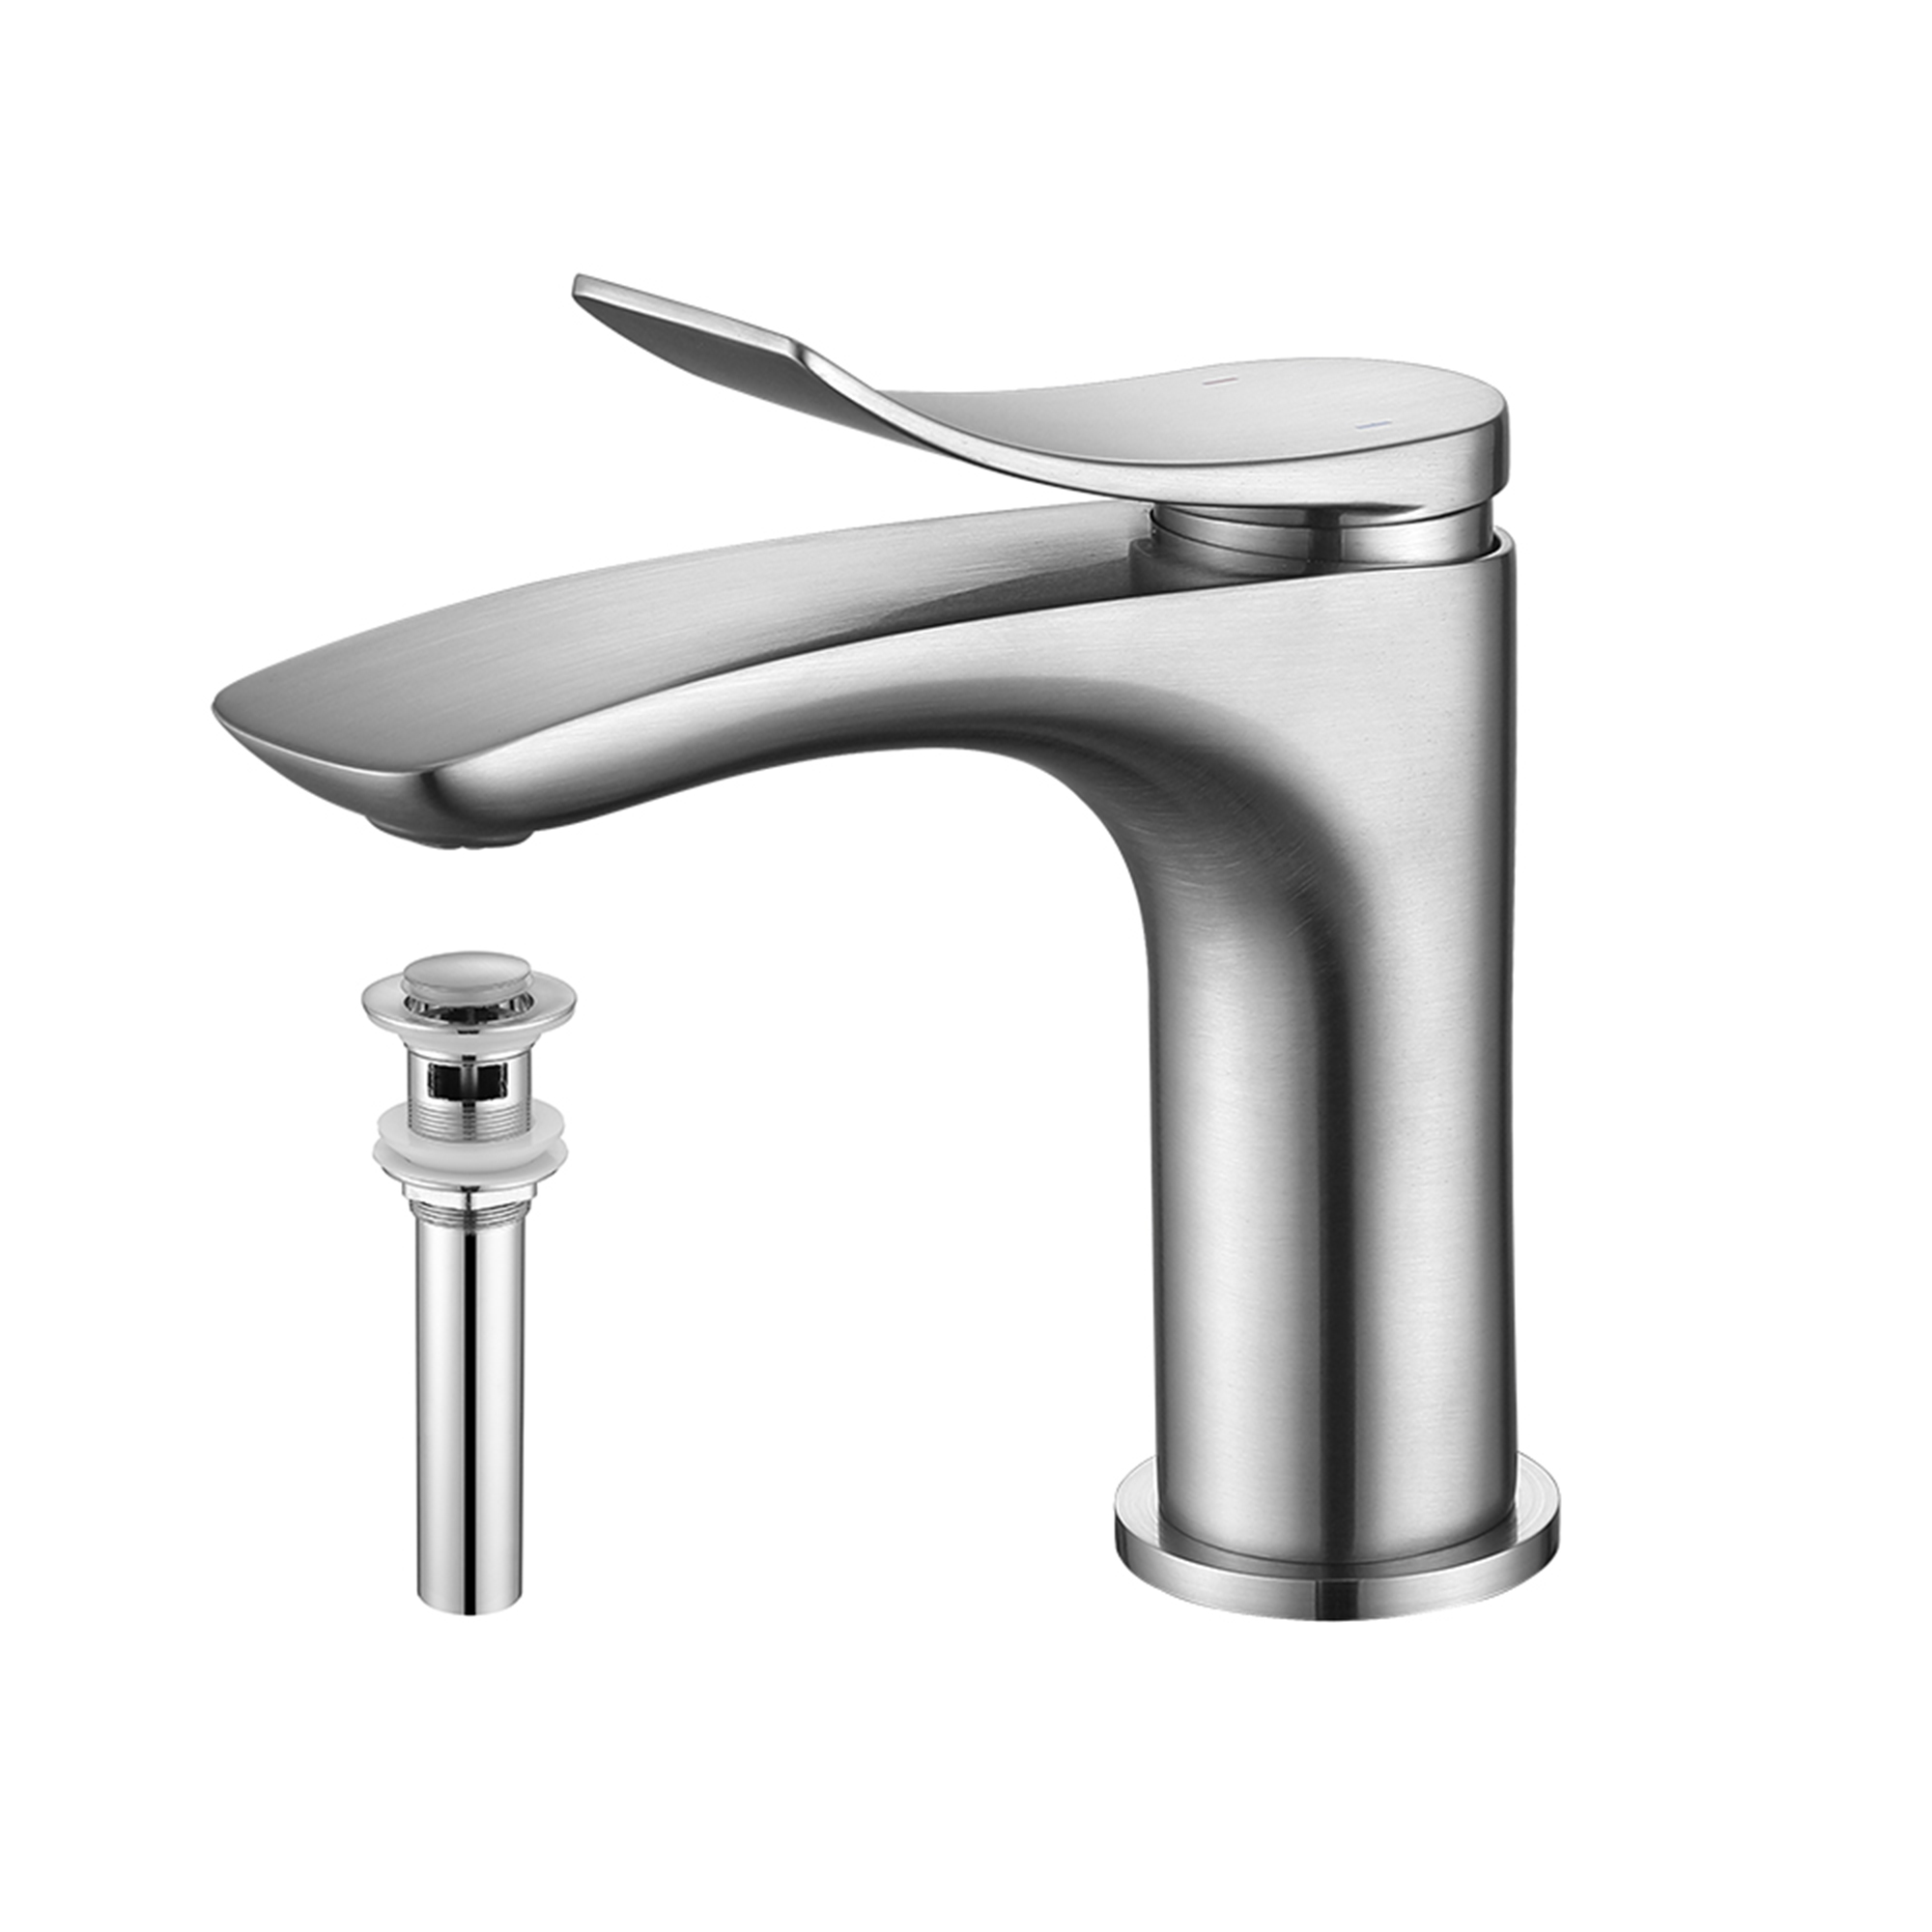 MP-11064 Nickel Deck-mount Hot And Cold Basin Faucet-Arrisea